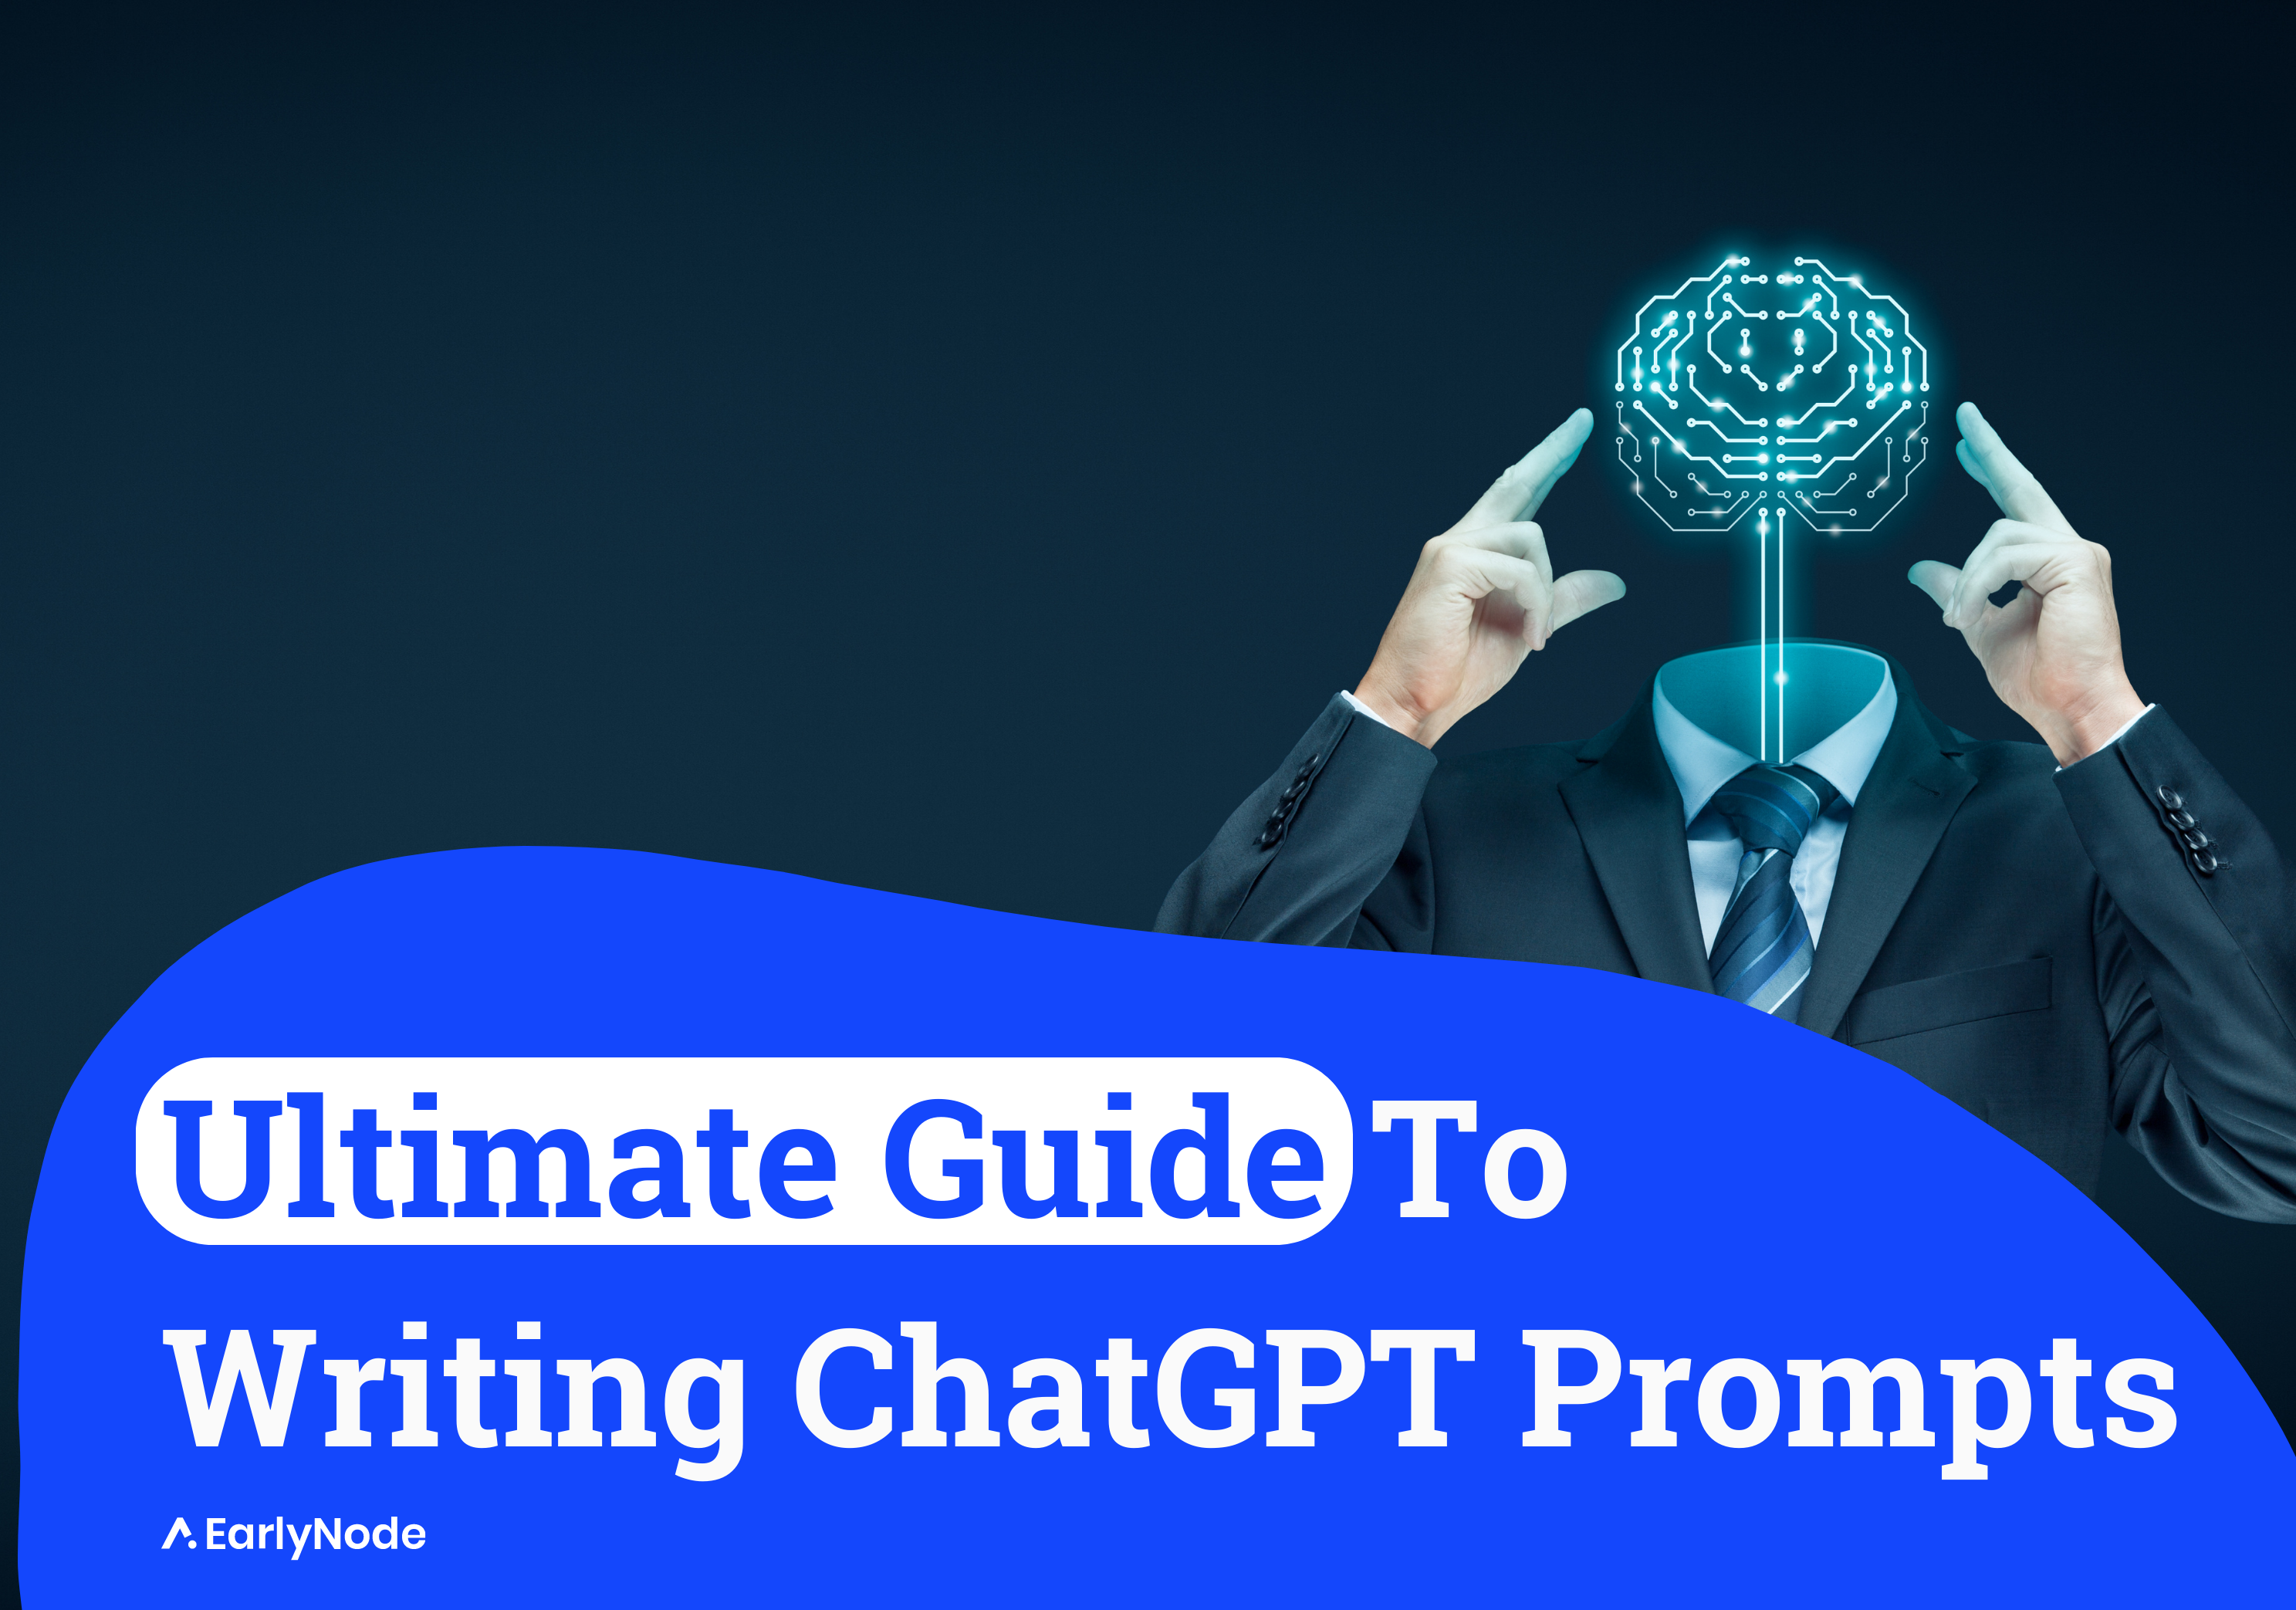 The Ultimate Guide To Writing Effective ChatGPT Prompts